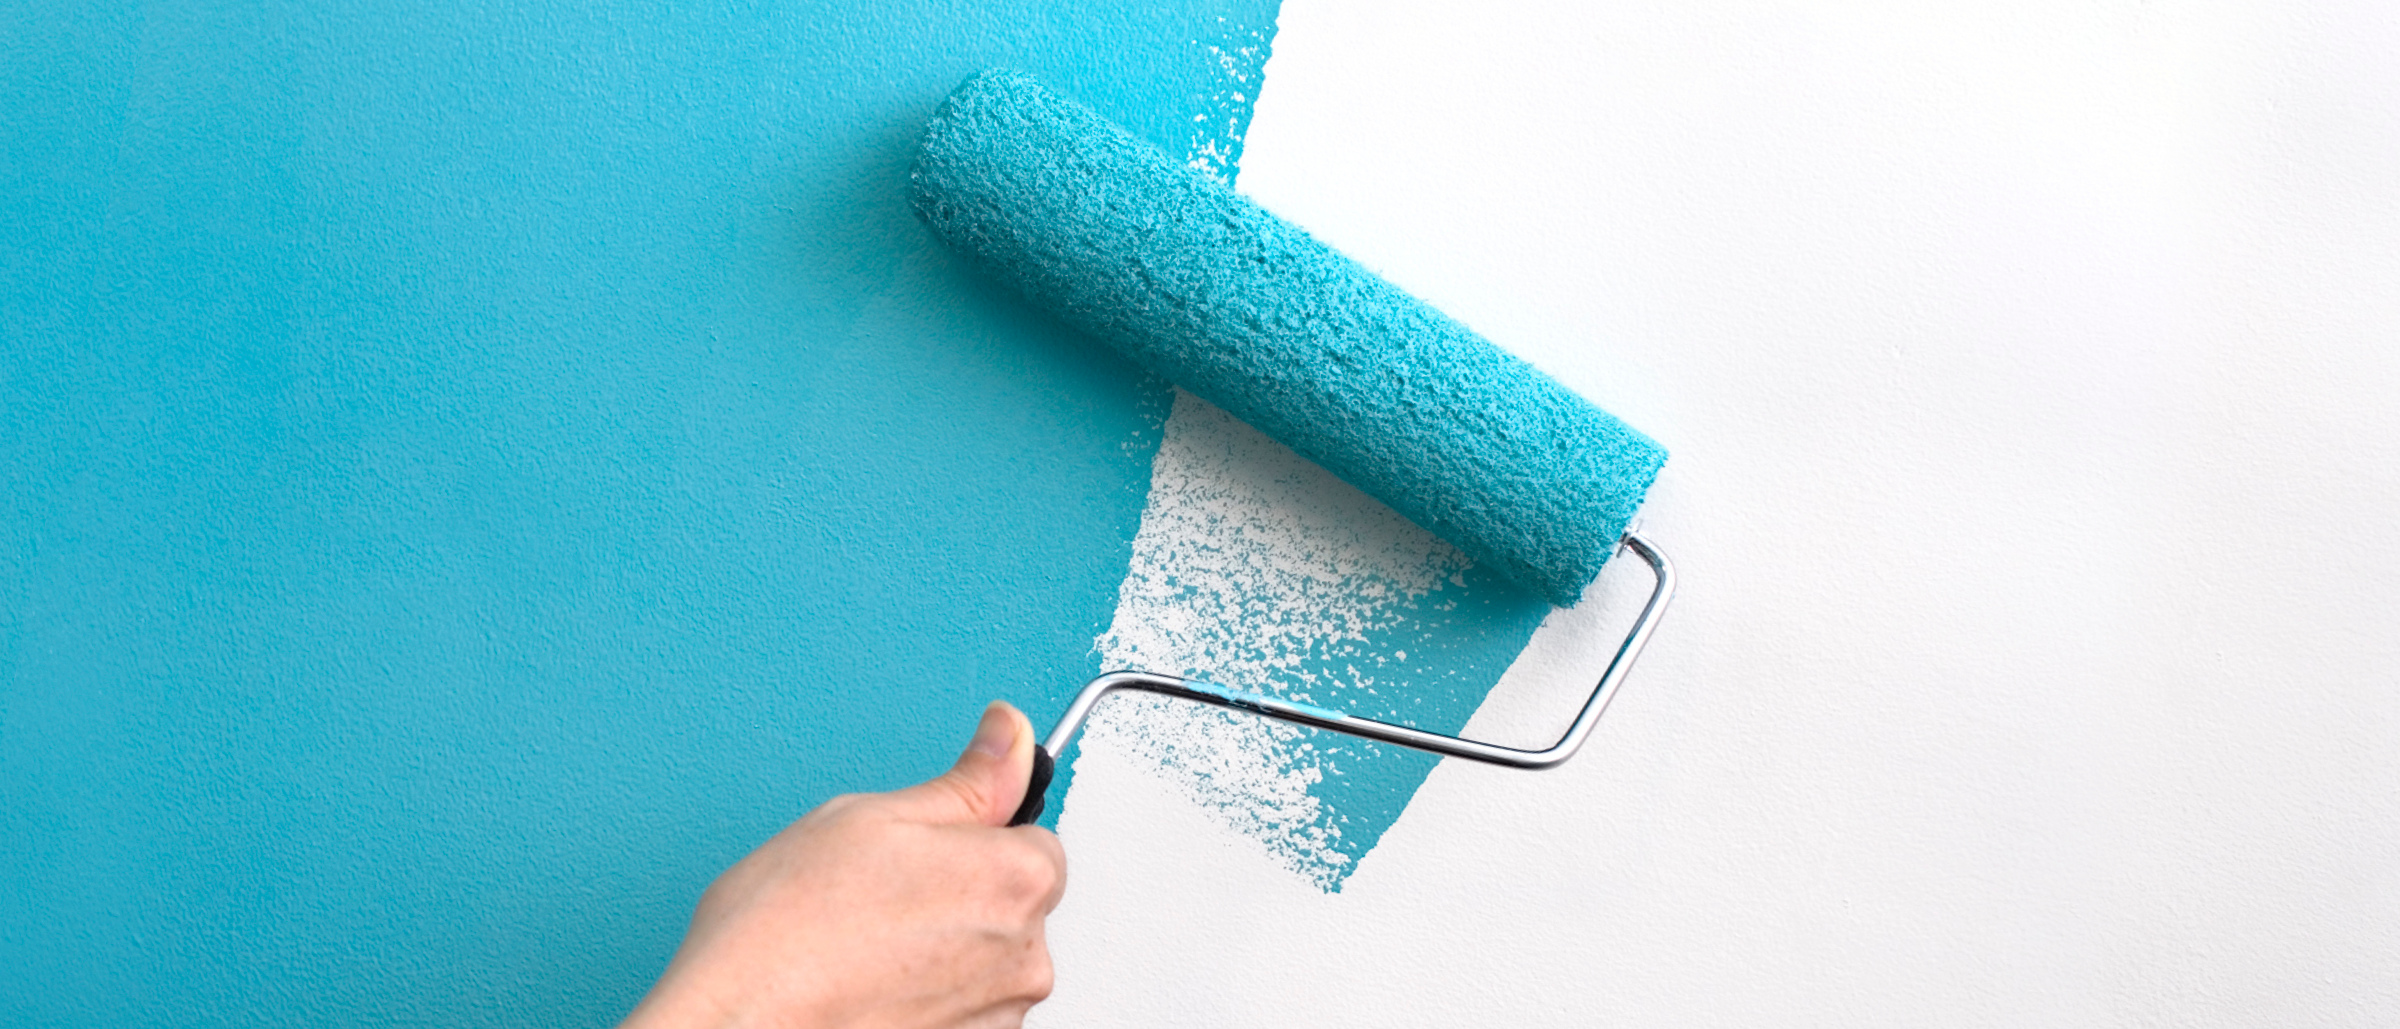 Rolling to Perfection: Our Guide to Preparing Your Paint Roller and Achieving a Flawless Finish